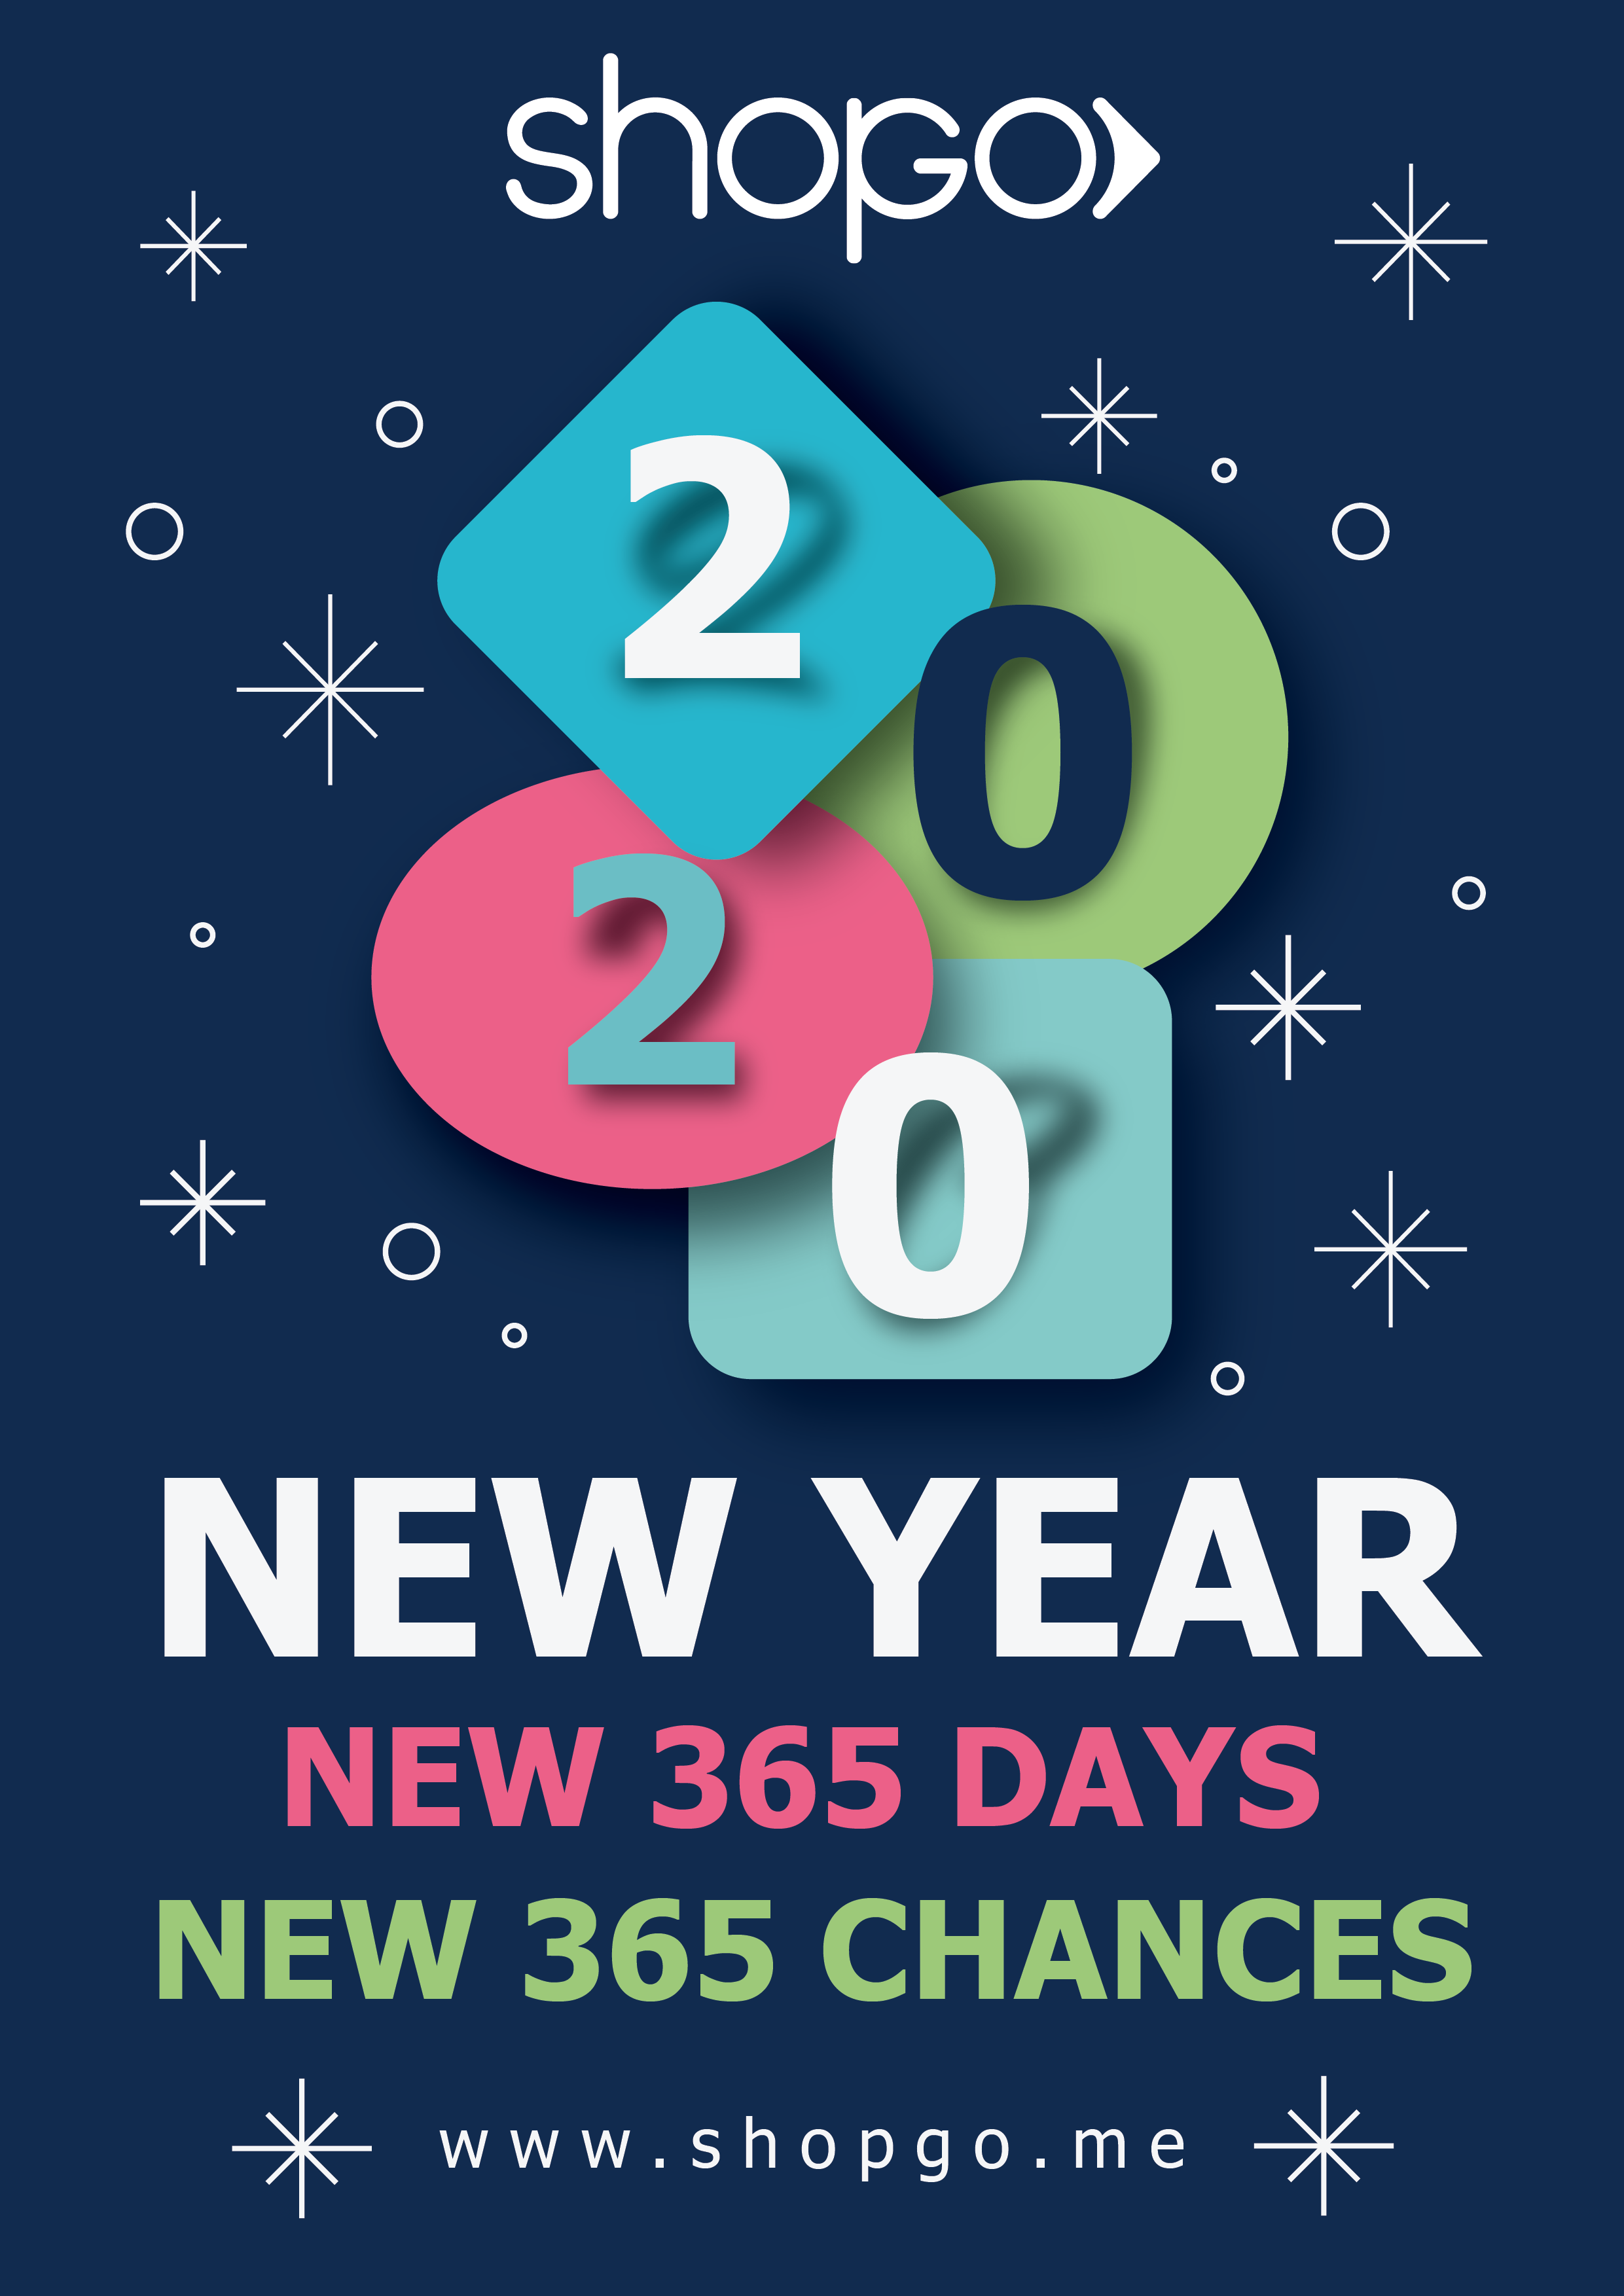 https://campaign-image.com/zohocampaigns/266036000008455004_zc_v12_new_year_01.png